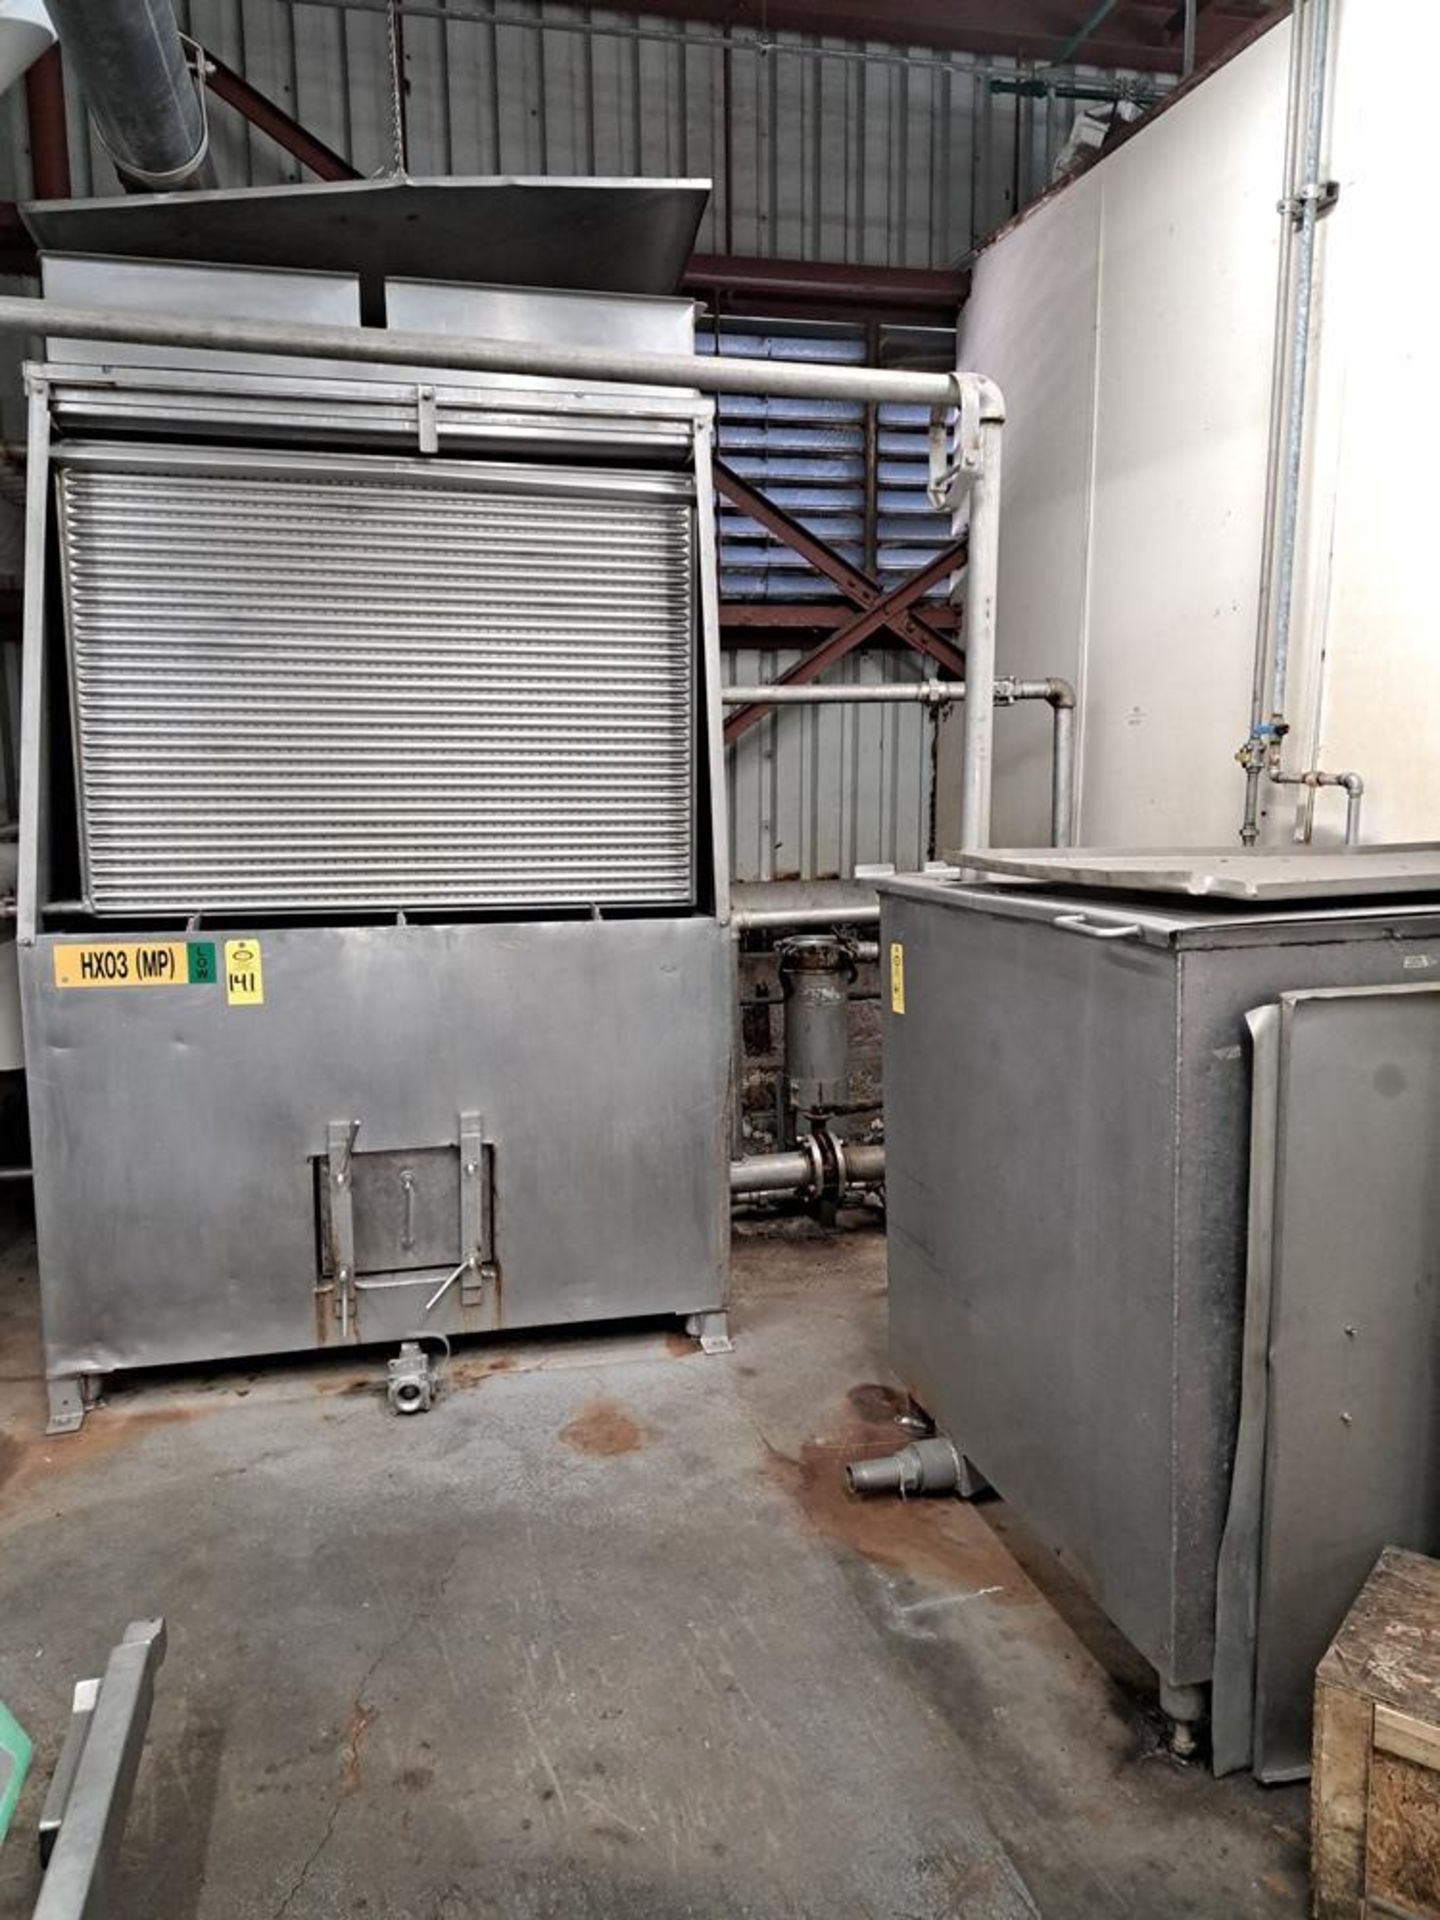 Stainless Steel Plate Chiller, 9 plates, 32 corrugations with filter, 5 h.p., 230/460 volt motor